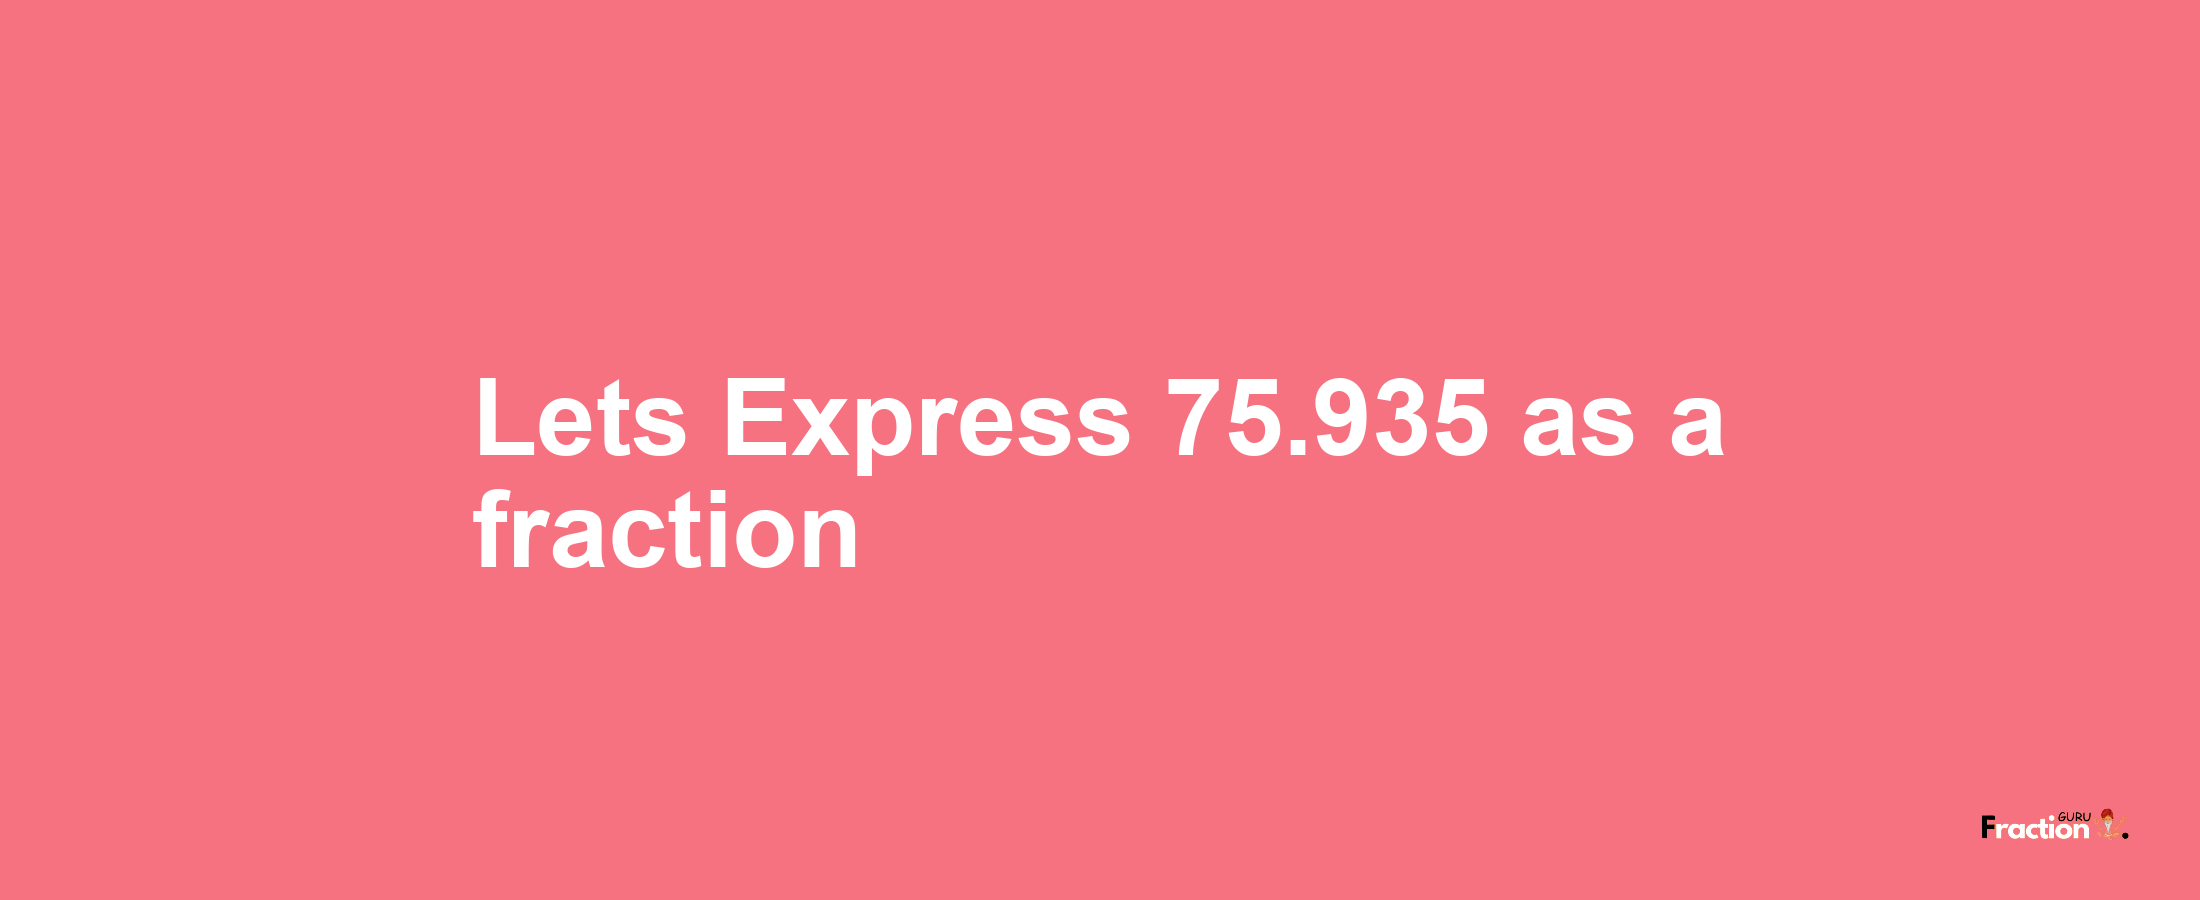 Lets Express 75.935 as afraction